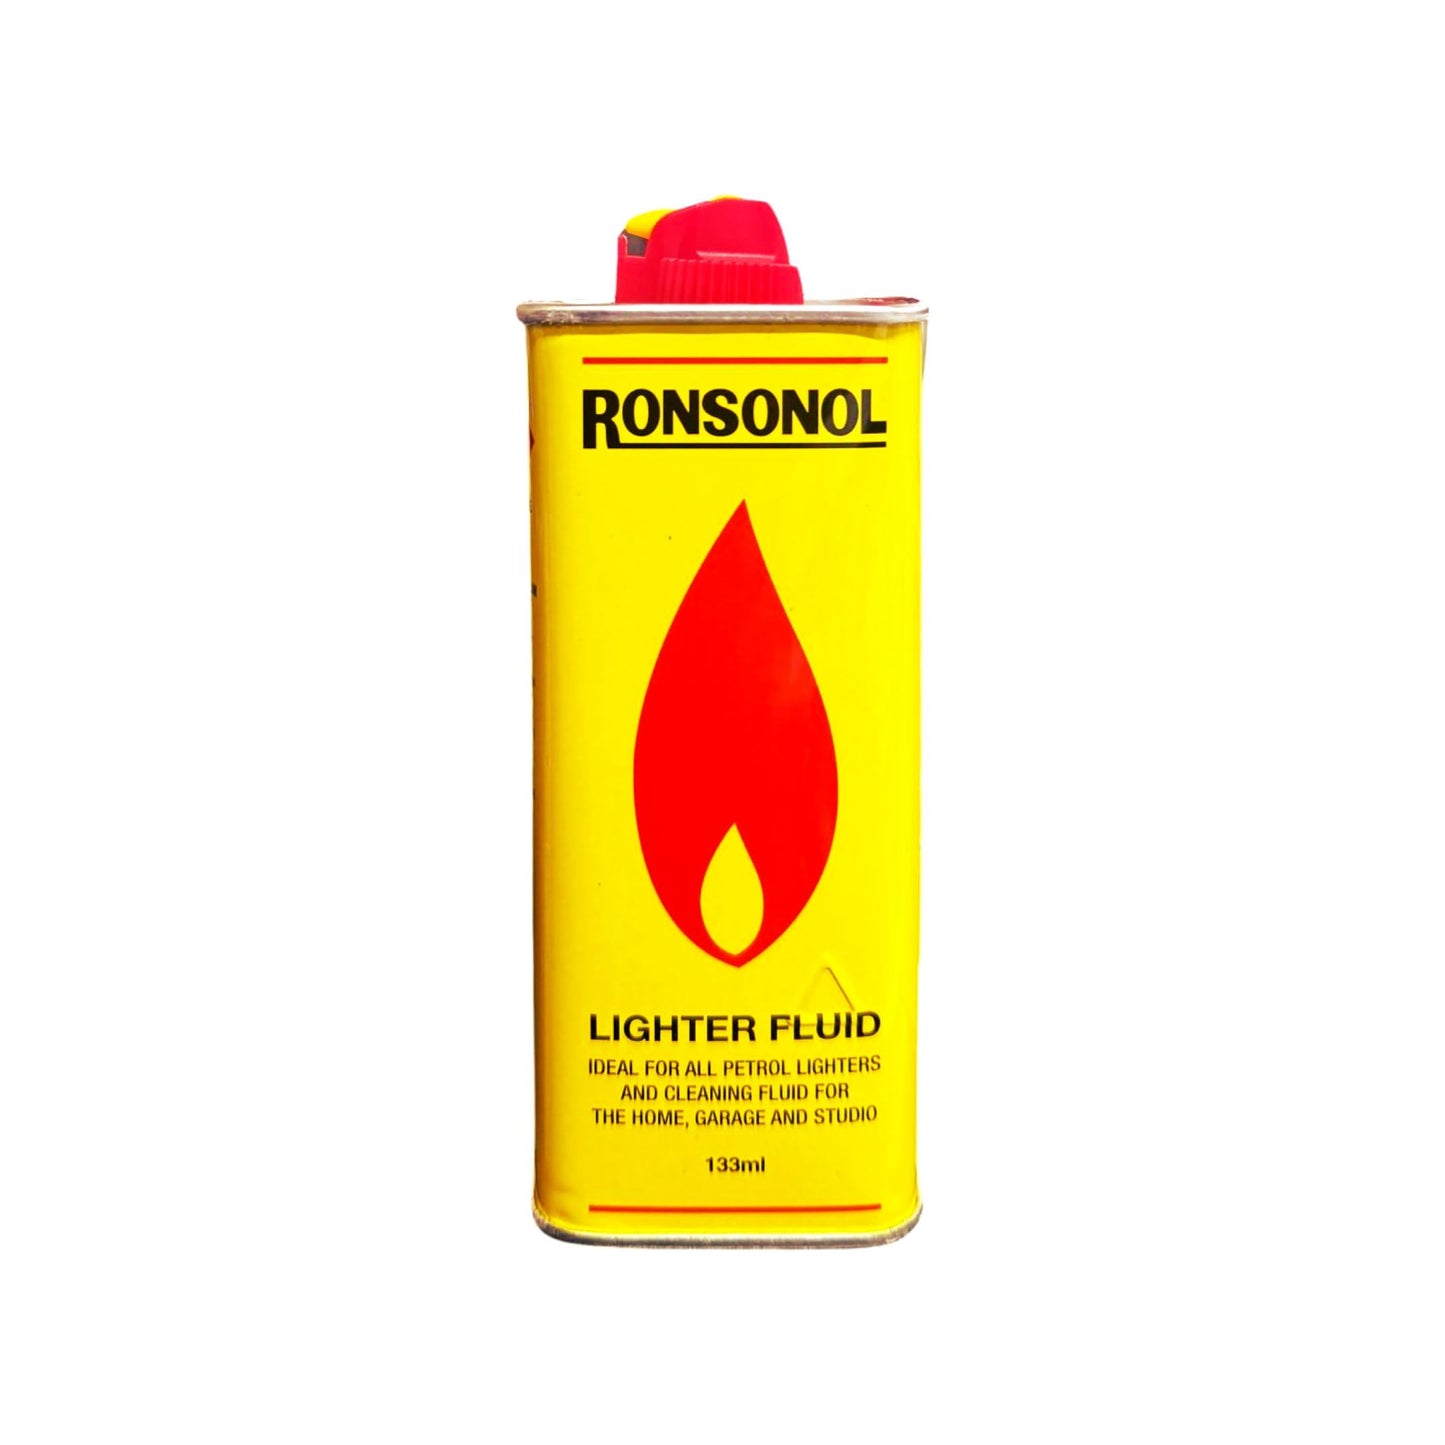 RONSONOL Lighter Fluid 133ml - Long-Lasting, Clean Burning Fuel for Everyday Use